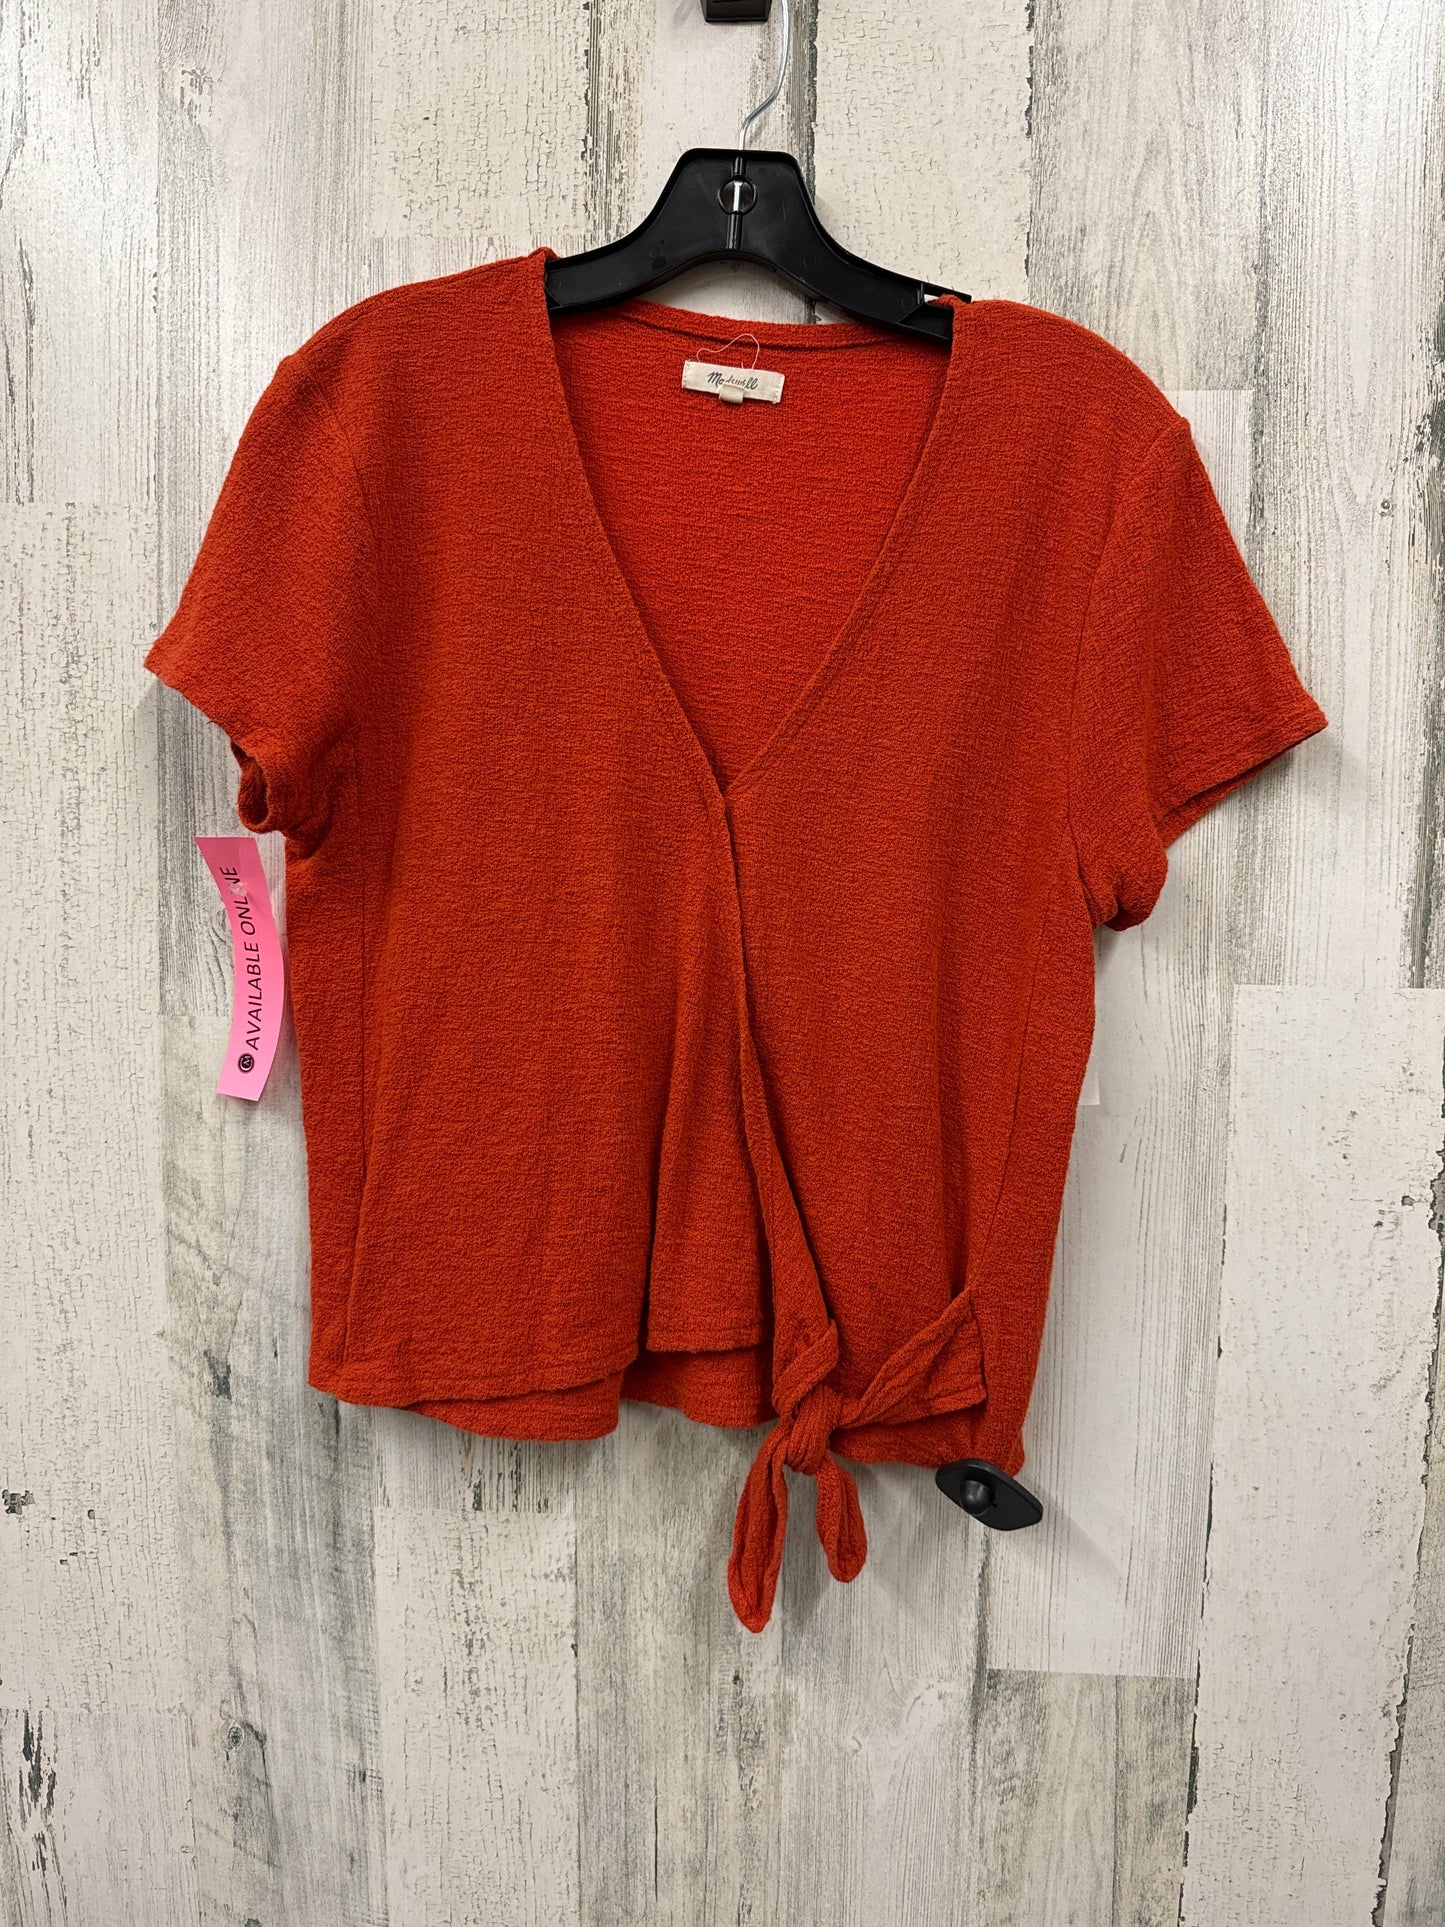 Red Top Short Sleeve Basic Madewell, Size M